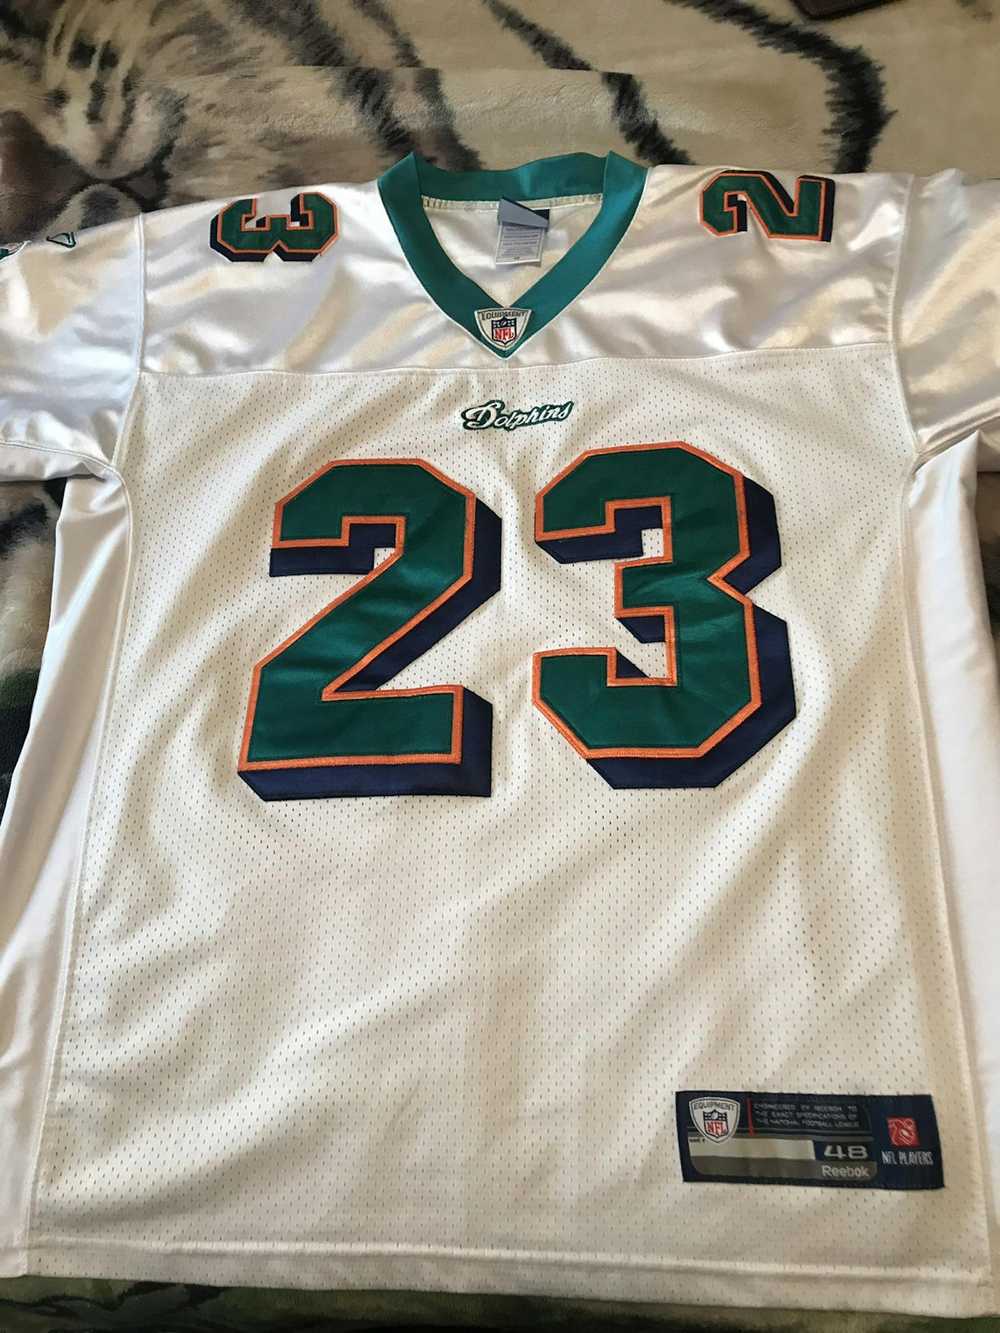 NFL × Reebok Miami Dolphins Ronnie Brown Jersey - image 1